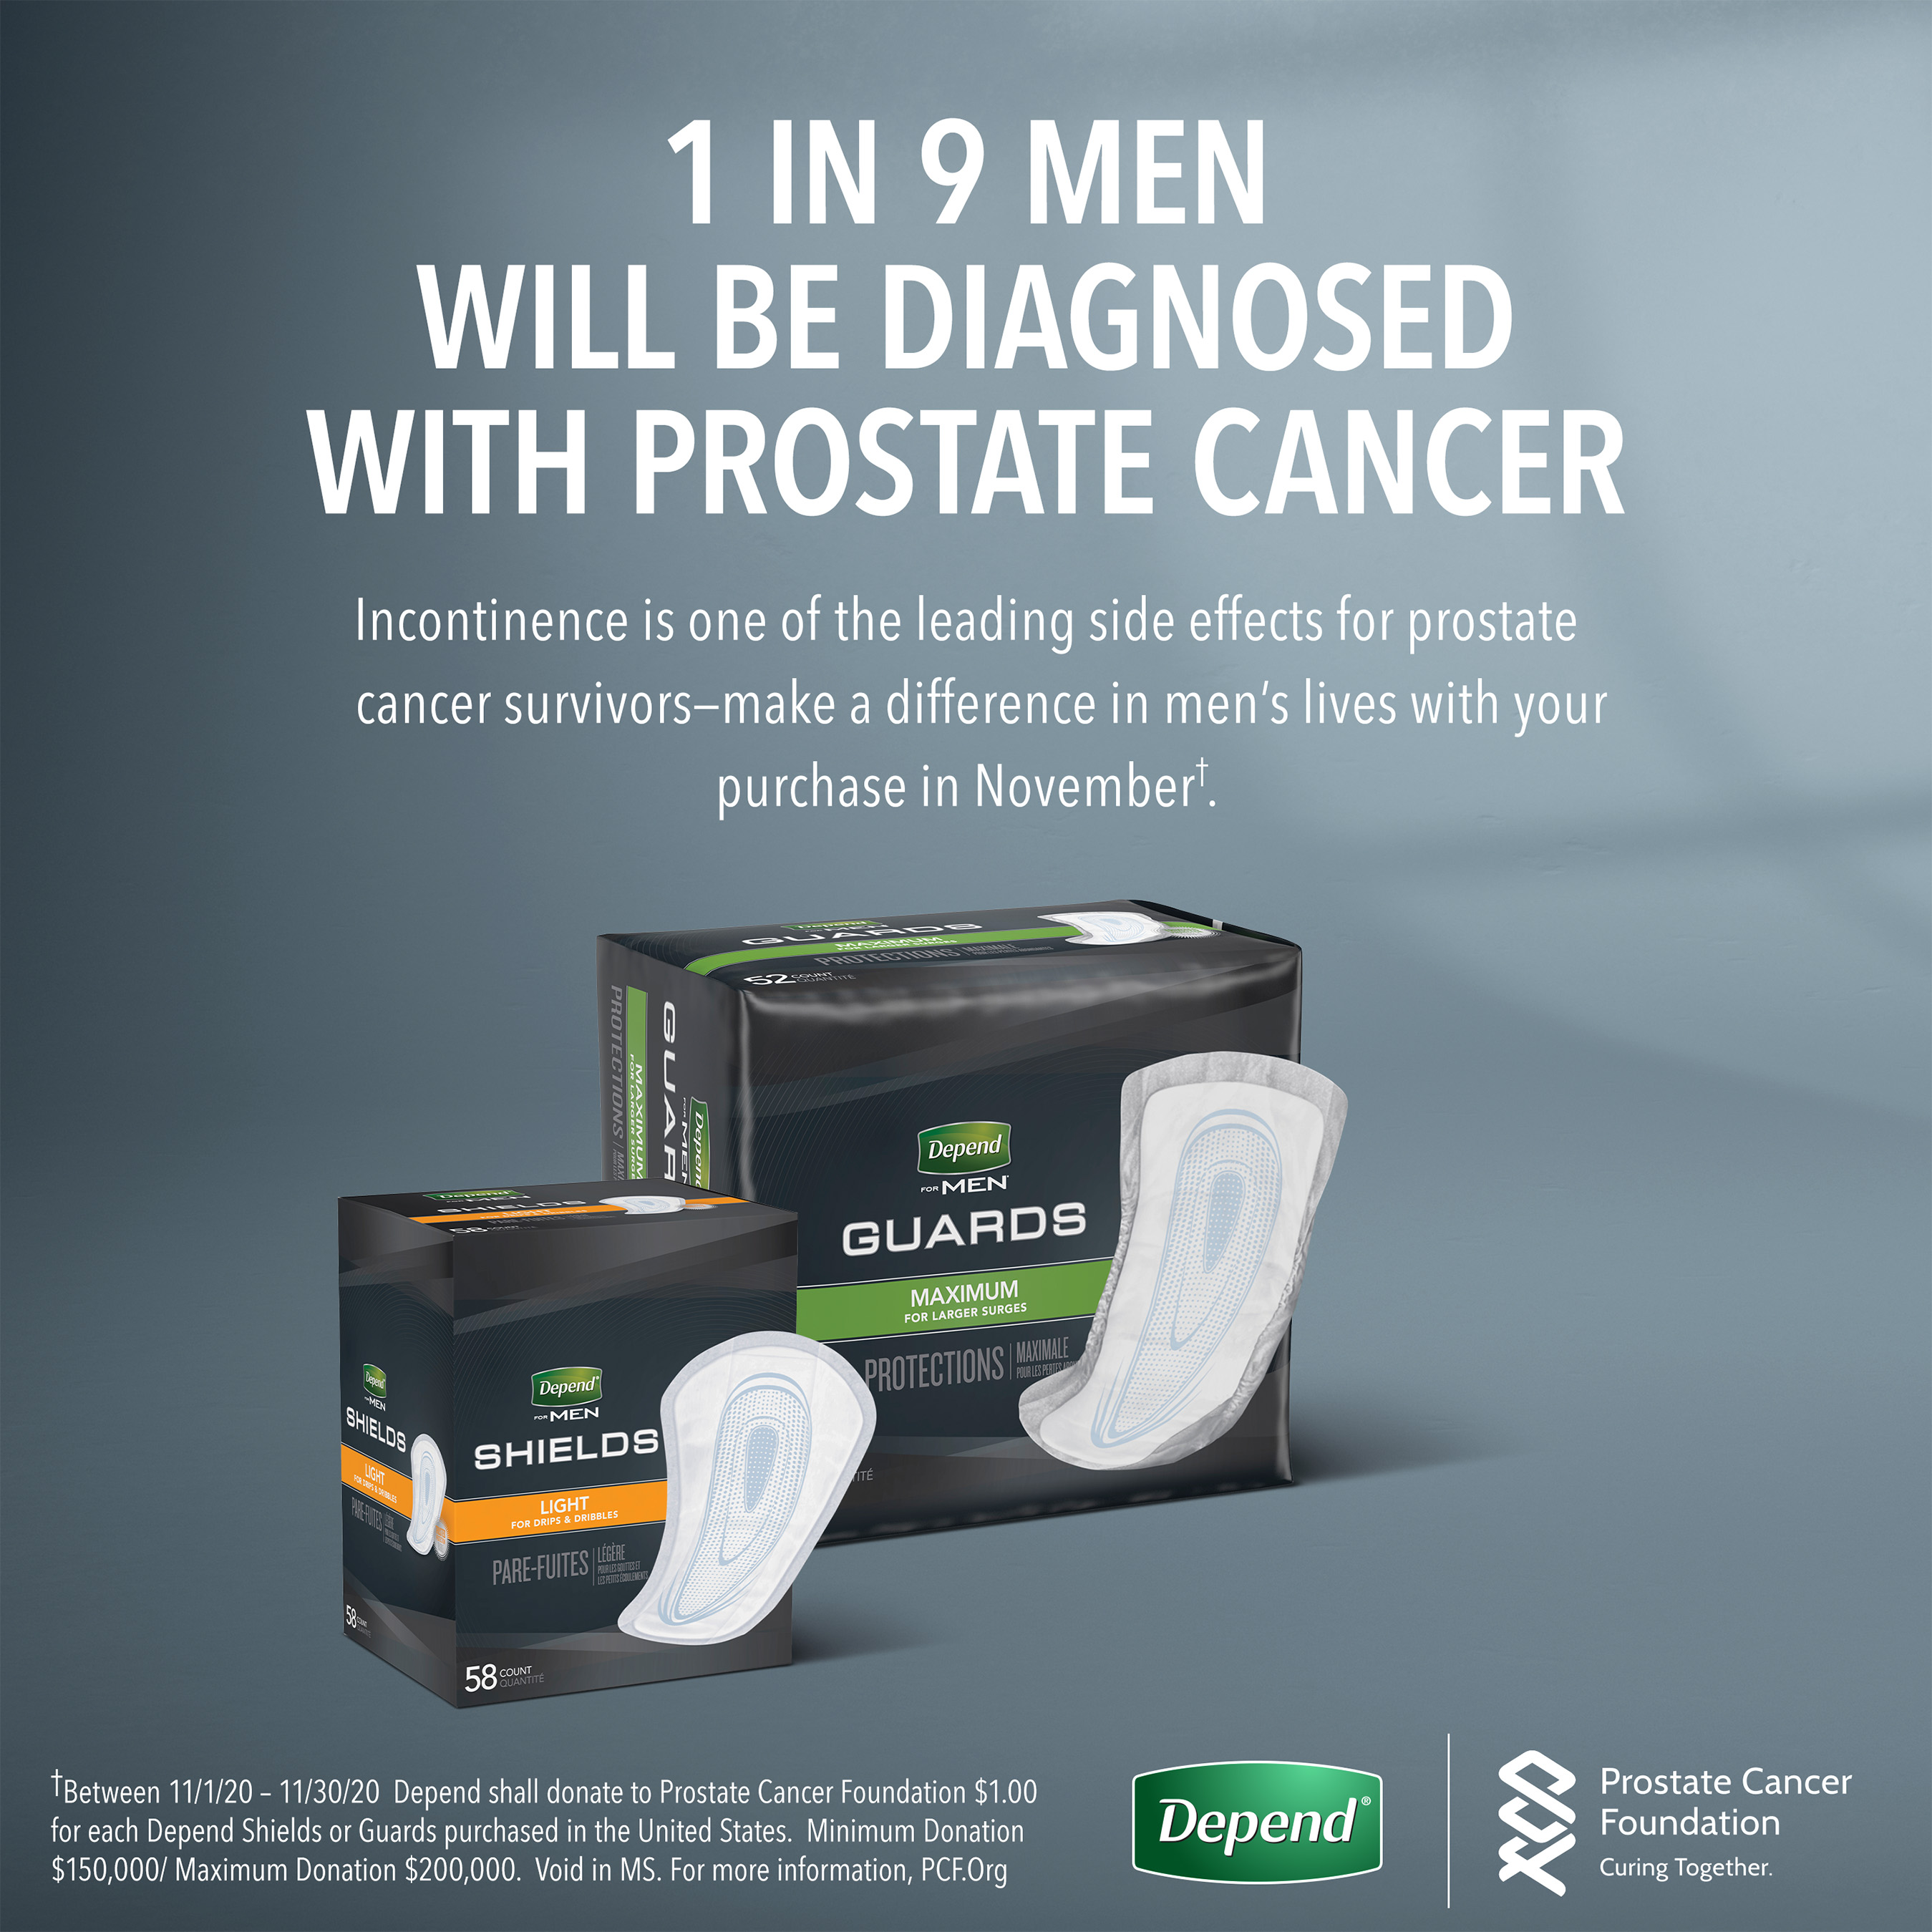 Depend Partners with Prostate Cancer Foundation to Raise Awareness for Prostate Cancer